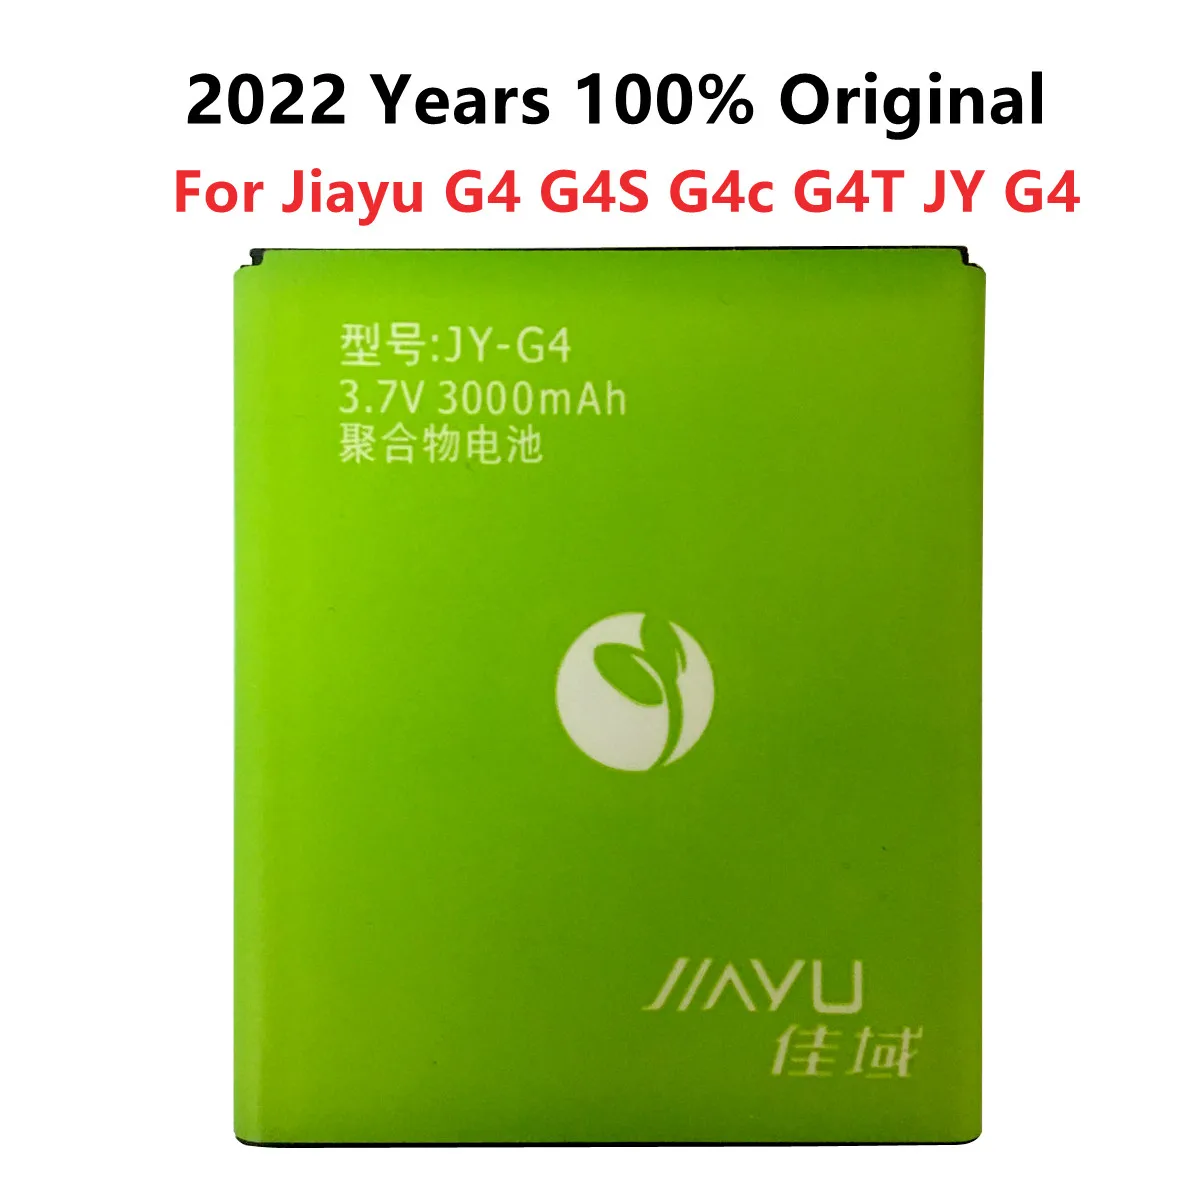 2022 3000mAh Li-ion JY-G4 Battery For JIAYU G4 G4S G4c G4T JYG4 JY G4 Mobile Phone Replacement Batteries 3.7V Recharge